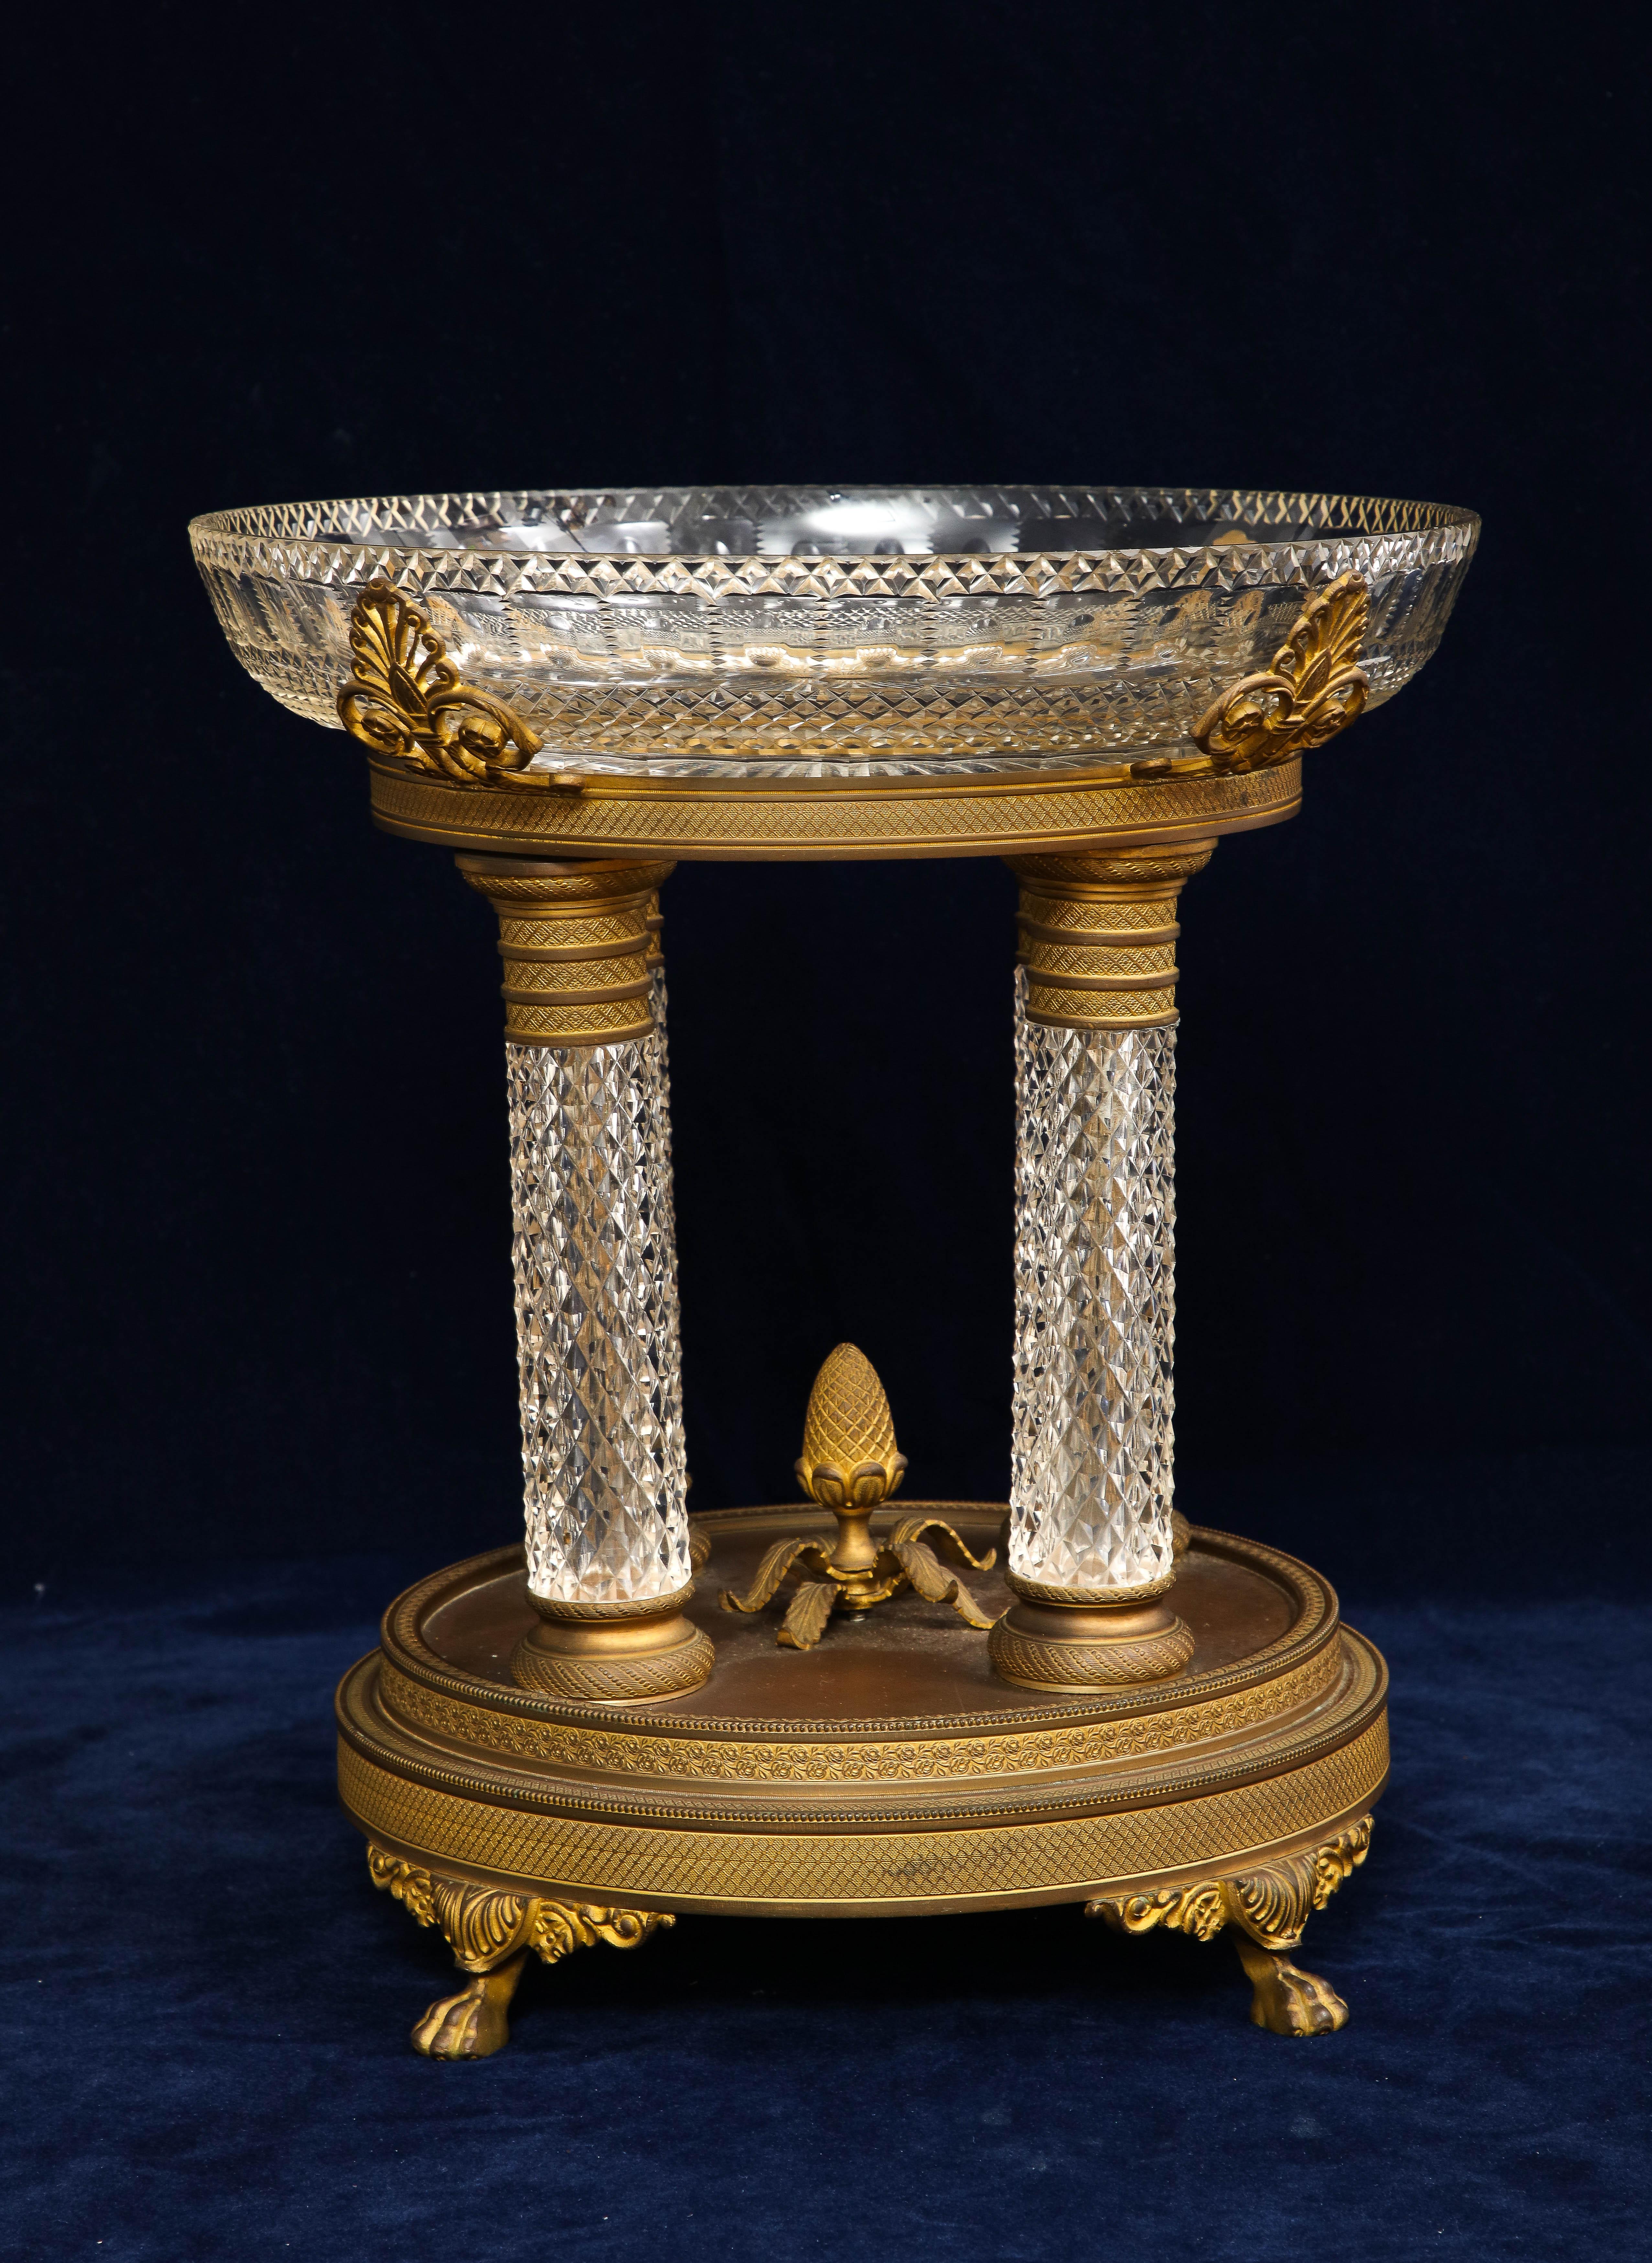 A Marvelous 19th Century French Louis XVI Style Baccarat Ormolu Mounted Crystal Centerpiece with Crystal Columns and Lions Paw Feet. The Bronze is marvelously case, hand-chassed, and hand-chiseled with tremendous detail. The crystal is all